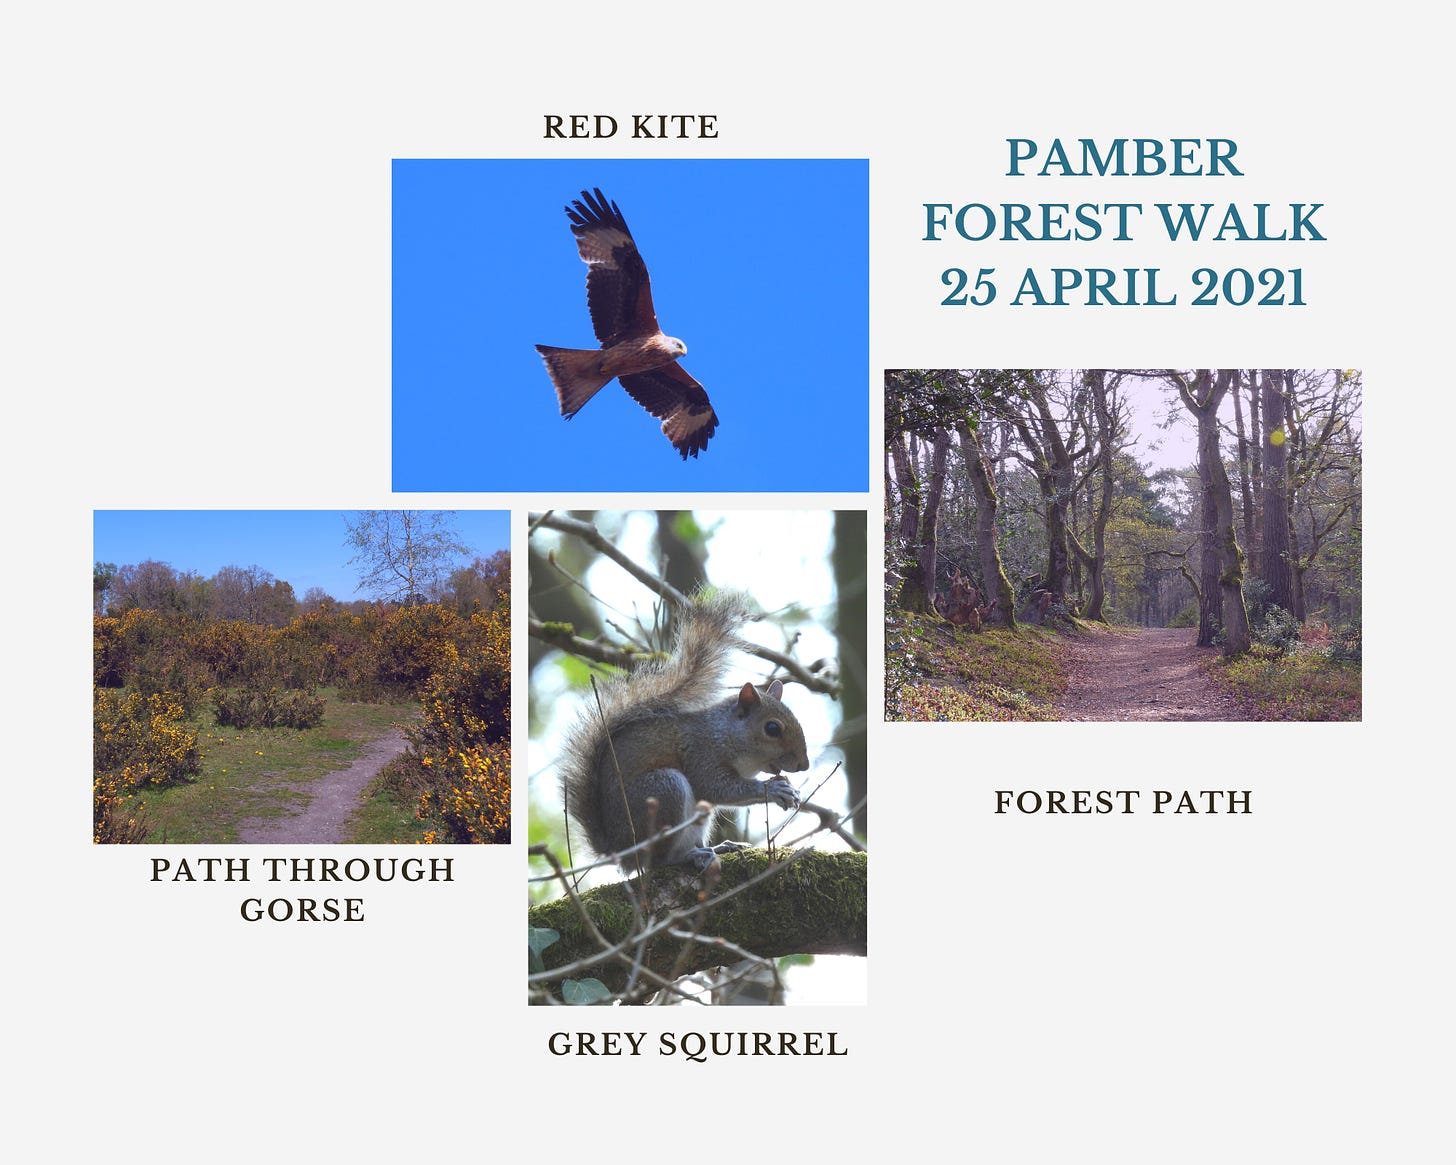 Collage of four images from my walk. Clockwise from the top: a Red Kite flying against a blue sky, a forest path lined with trees, a Grey Squirrel sitting on a branch, a path through Gorse bushes. Title on the collage reads: Pamber Forest Walk 25 April 2021